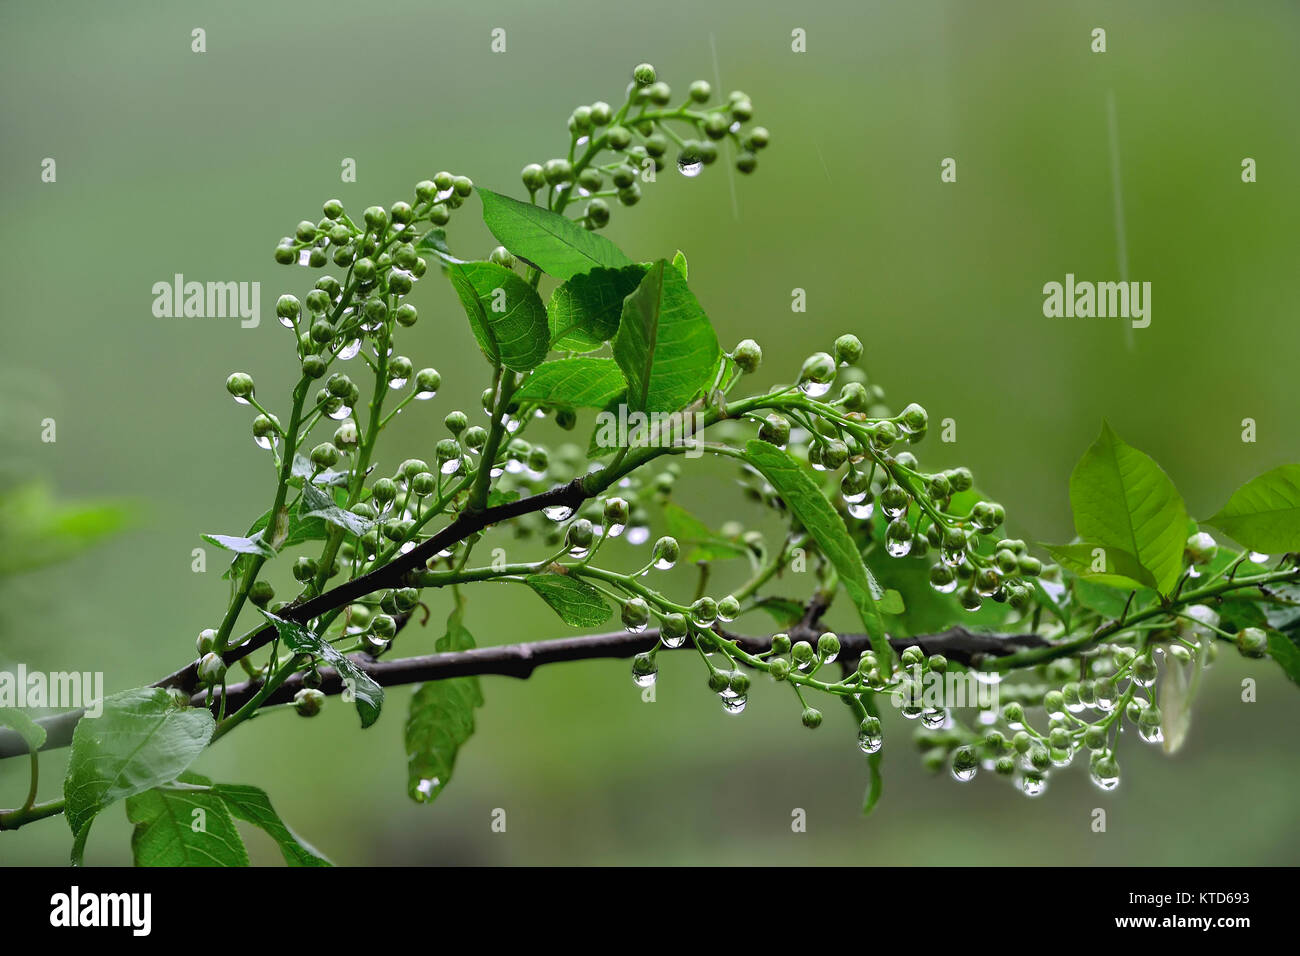 Sprig of bird cherry with swollen flower buds and young green leaves in the shiny droplets of spring rain Stock Photo